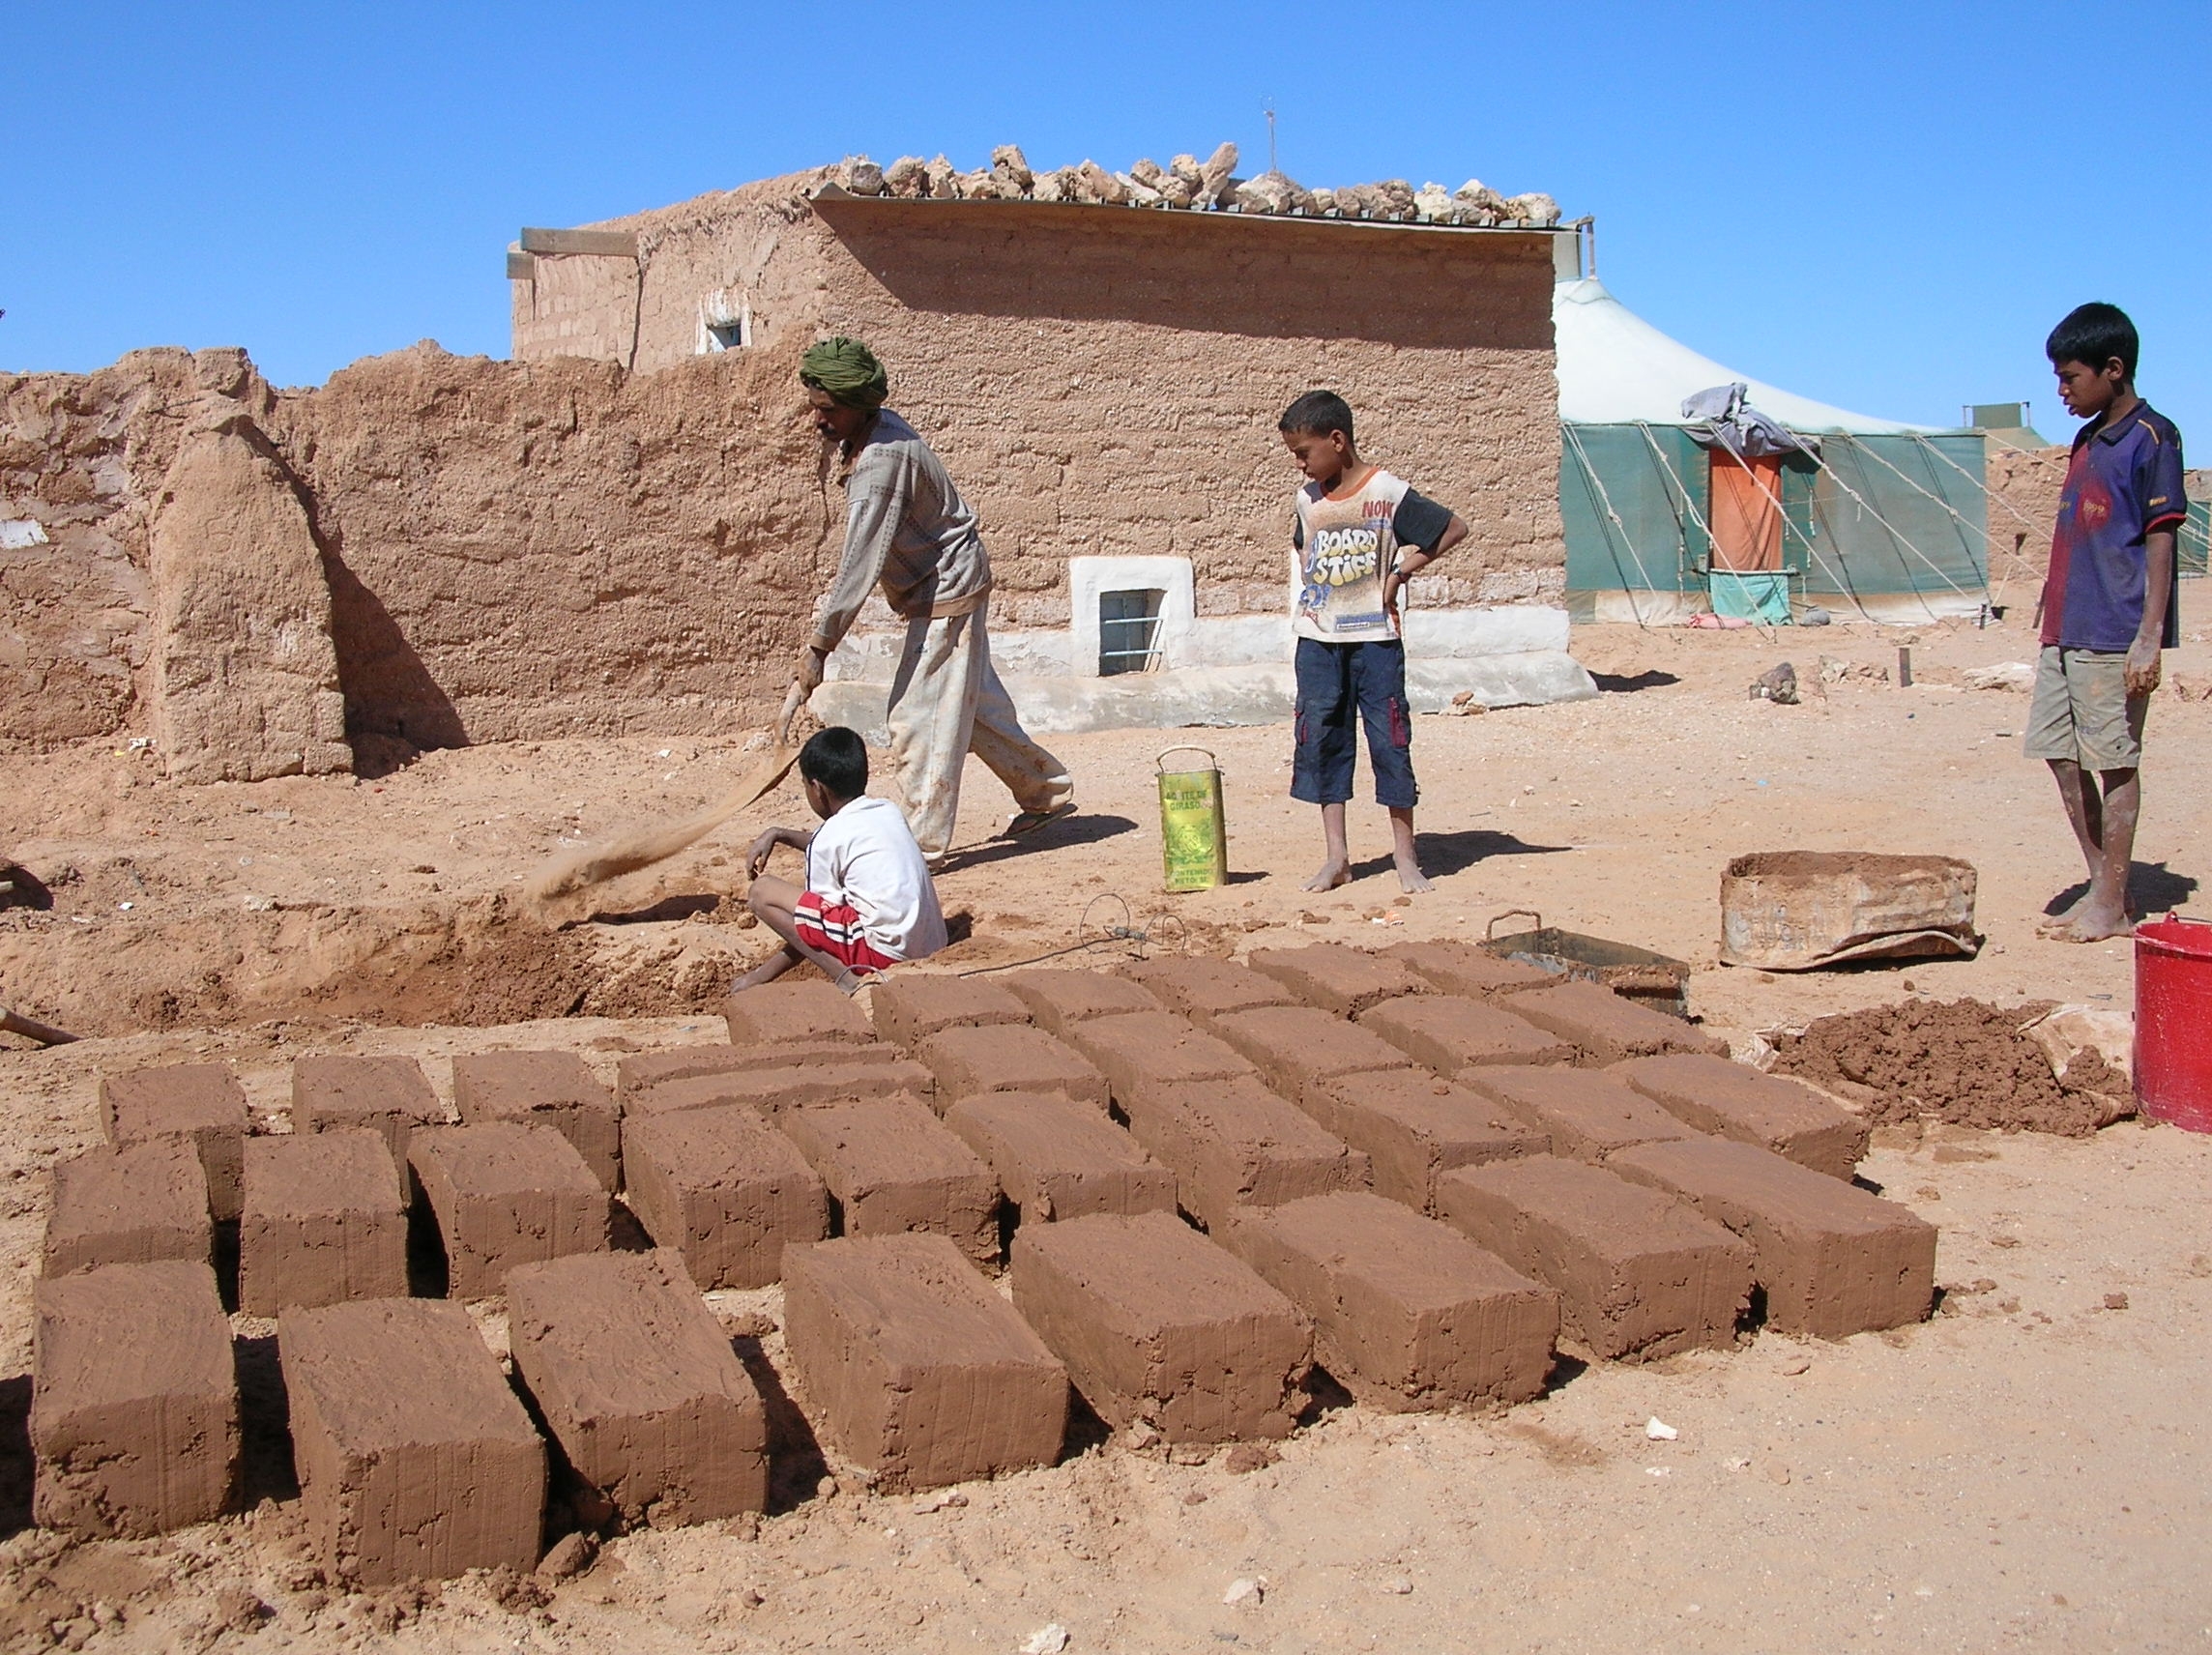 Families rebuilding using their own resources in a Saharawi refugee camp, Western Sahara